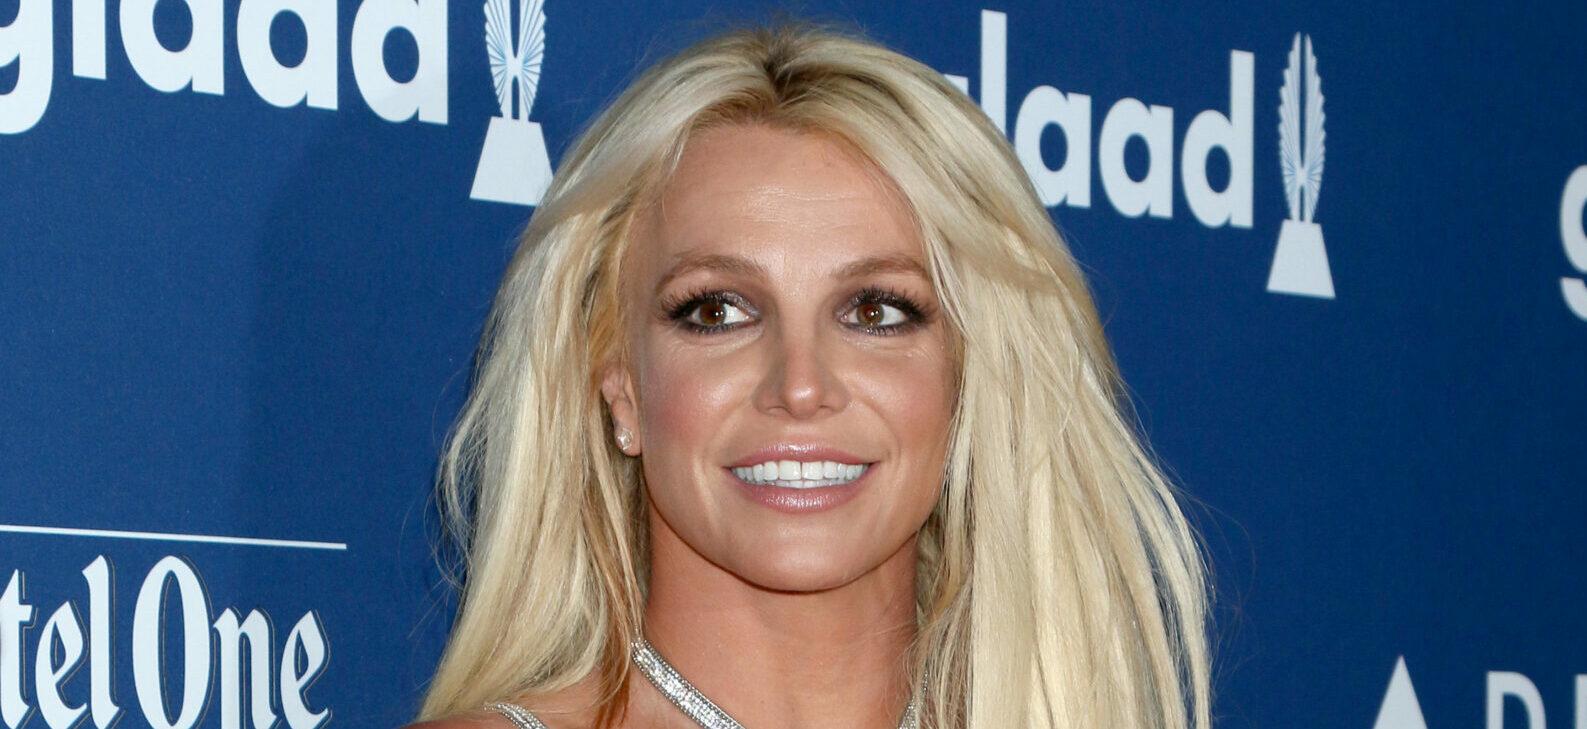 Latest Britney Spears Dancing Video Ignites New Controversy